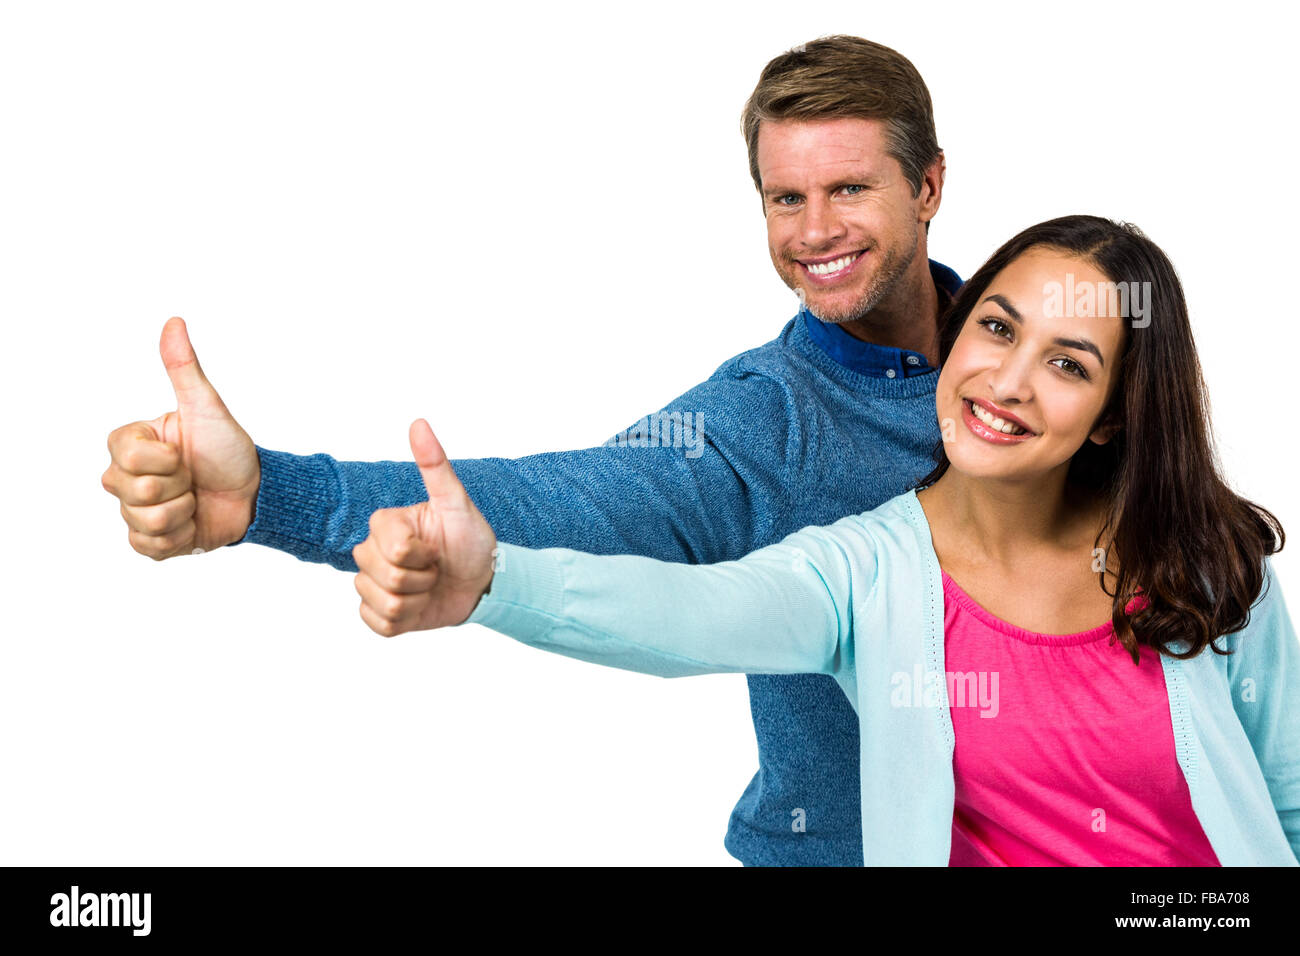 Portrait of smiling couple showing thumps up sign Stock Photo